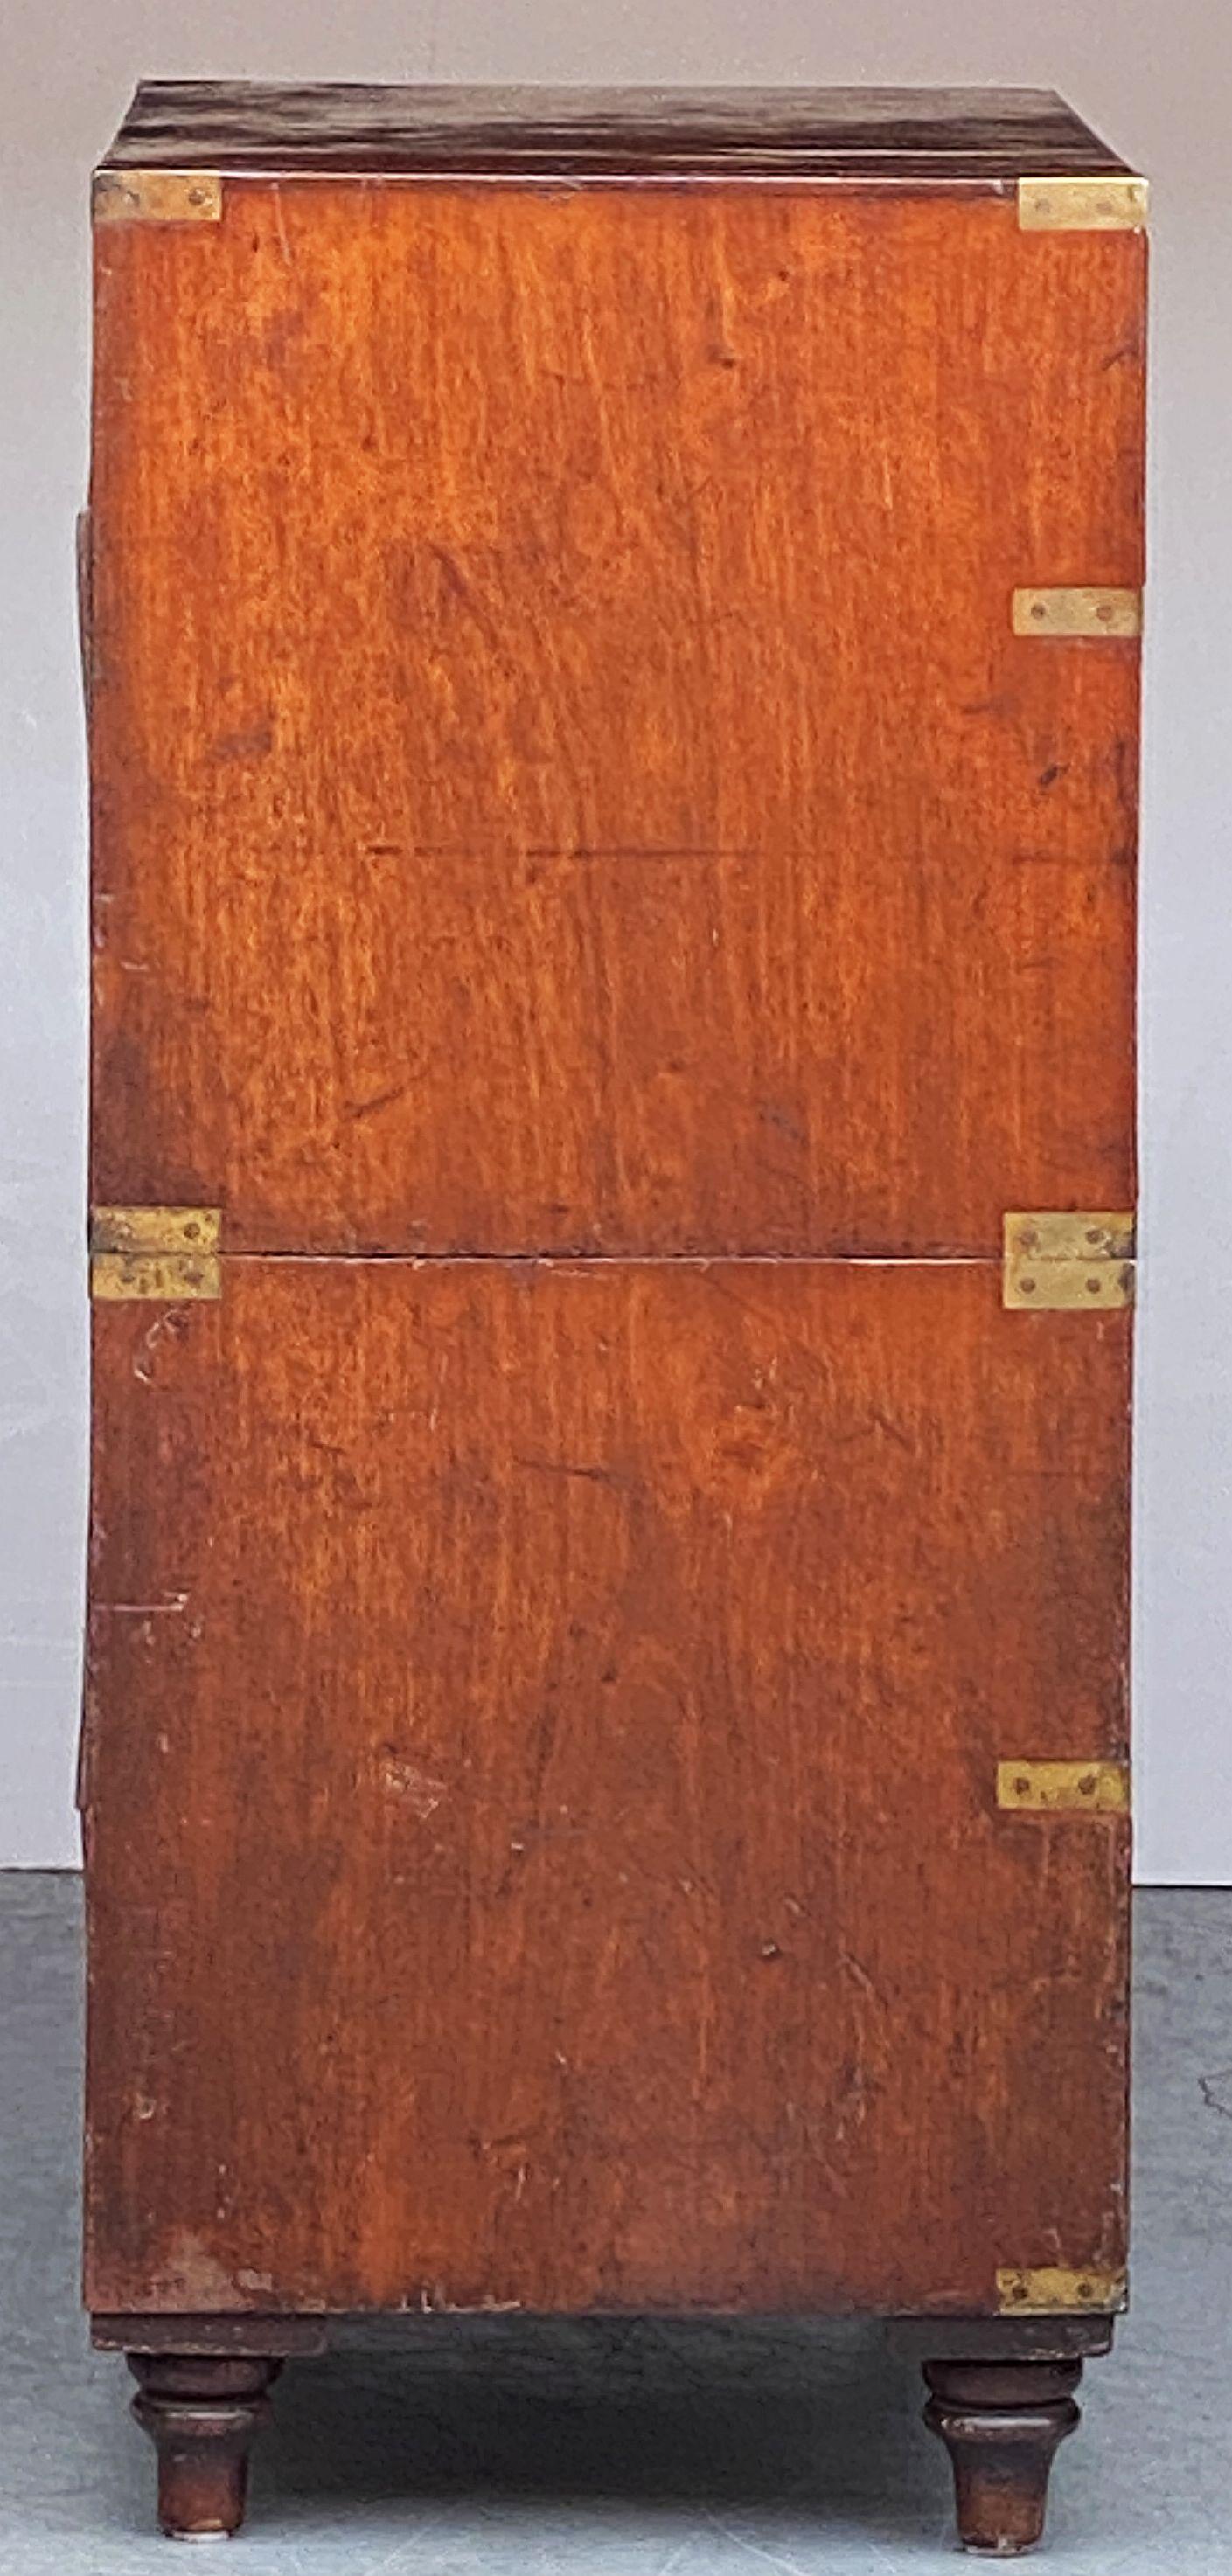 British Military Officer's Campaign Chest or Dresser of Brass-Bound Mahogany For Sale 6